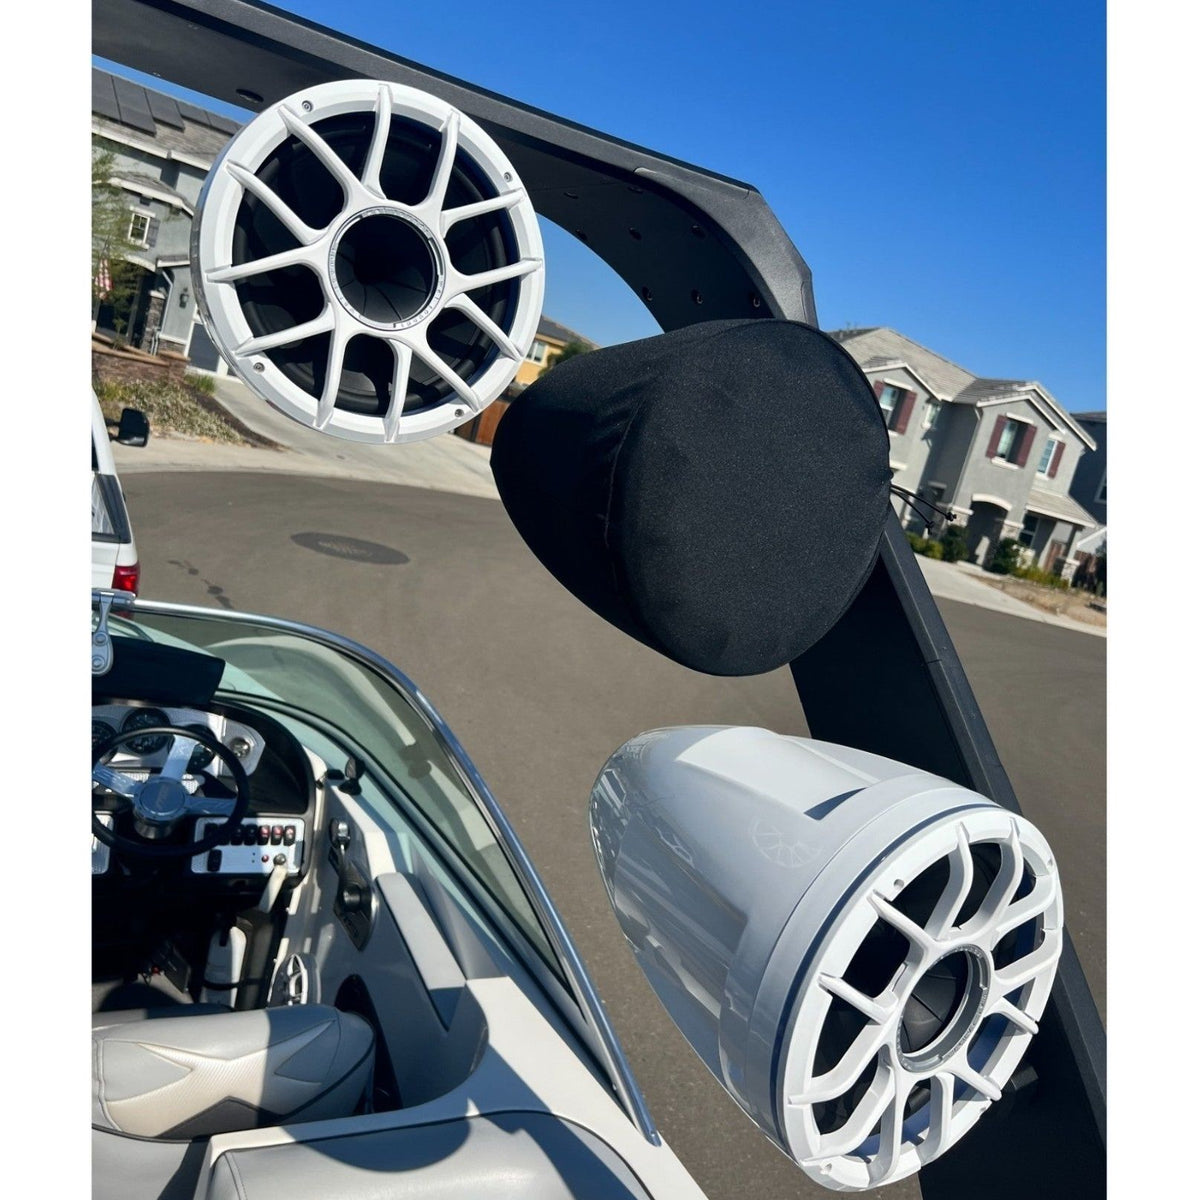 Wet Sounds Rev12 Speaker Covers for Wakesurf and Wakeboard Boat